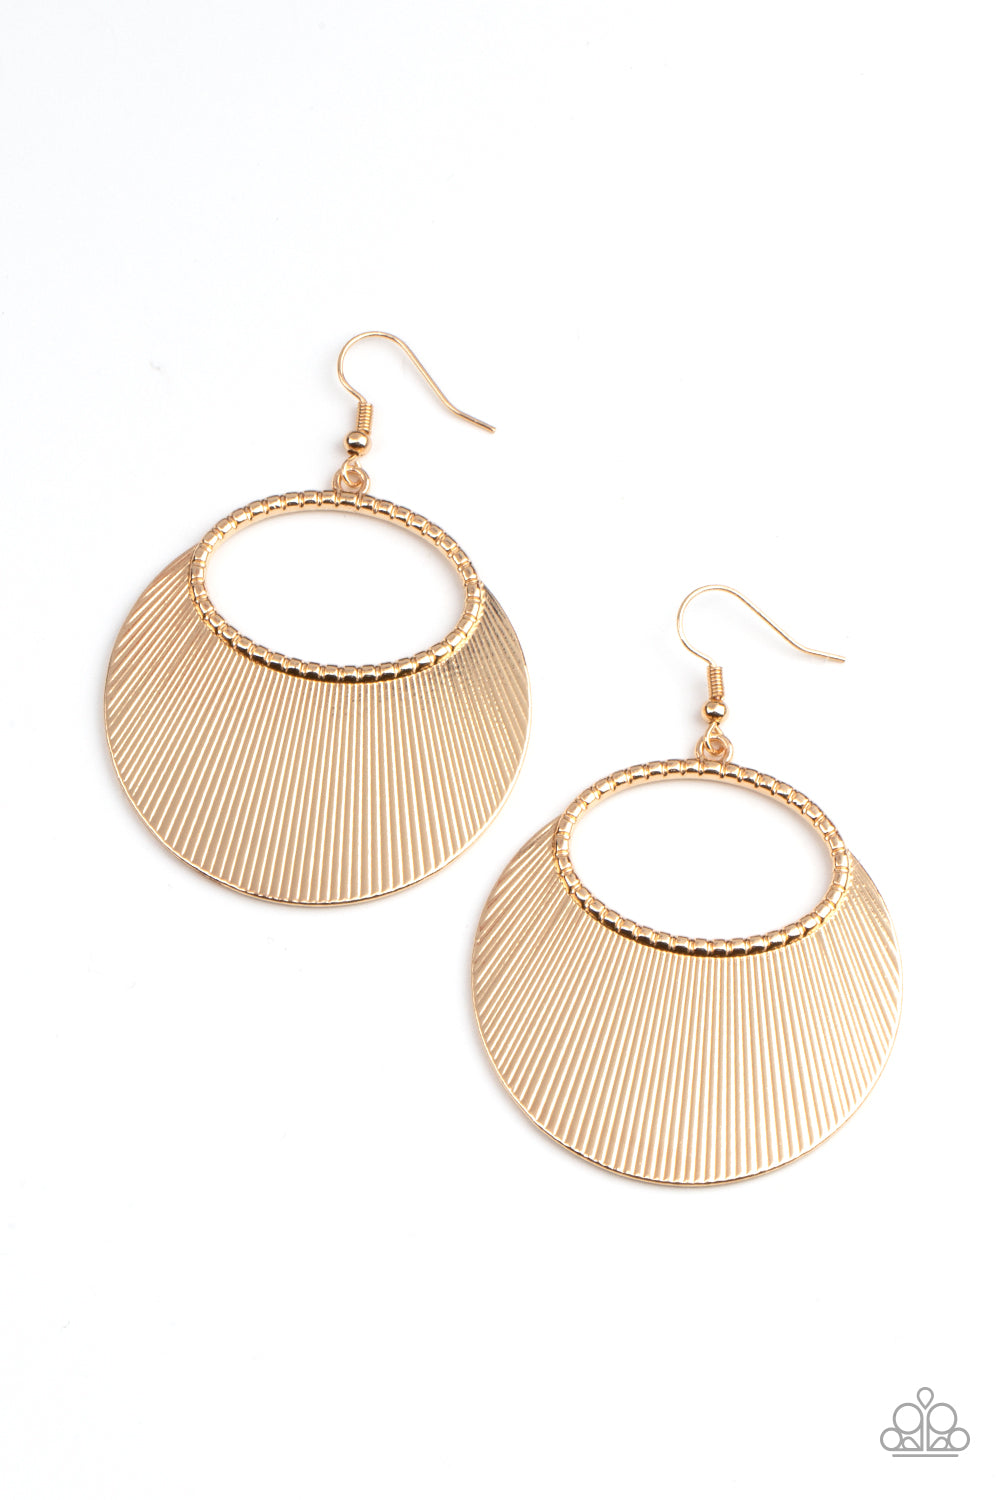 Paparazzi Accessories Fan Girl Glam - Gold Earrings - Lady T Accessories